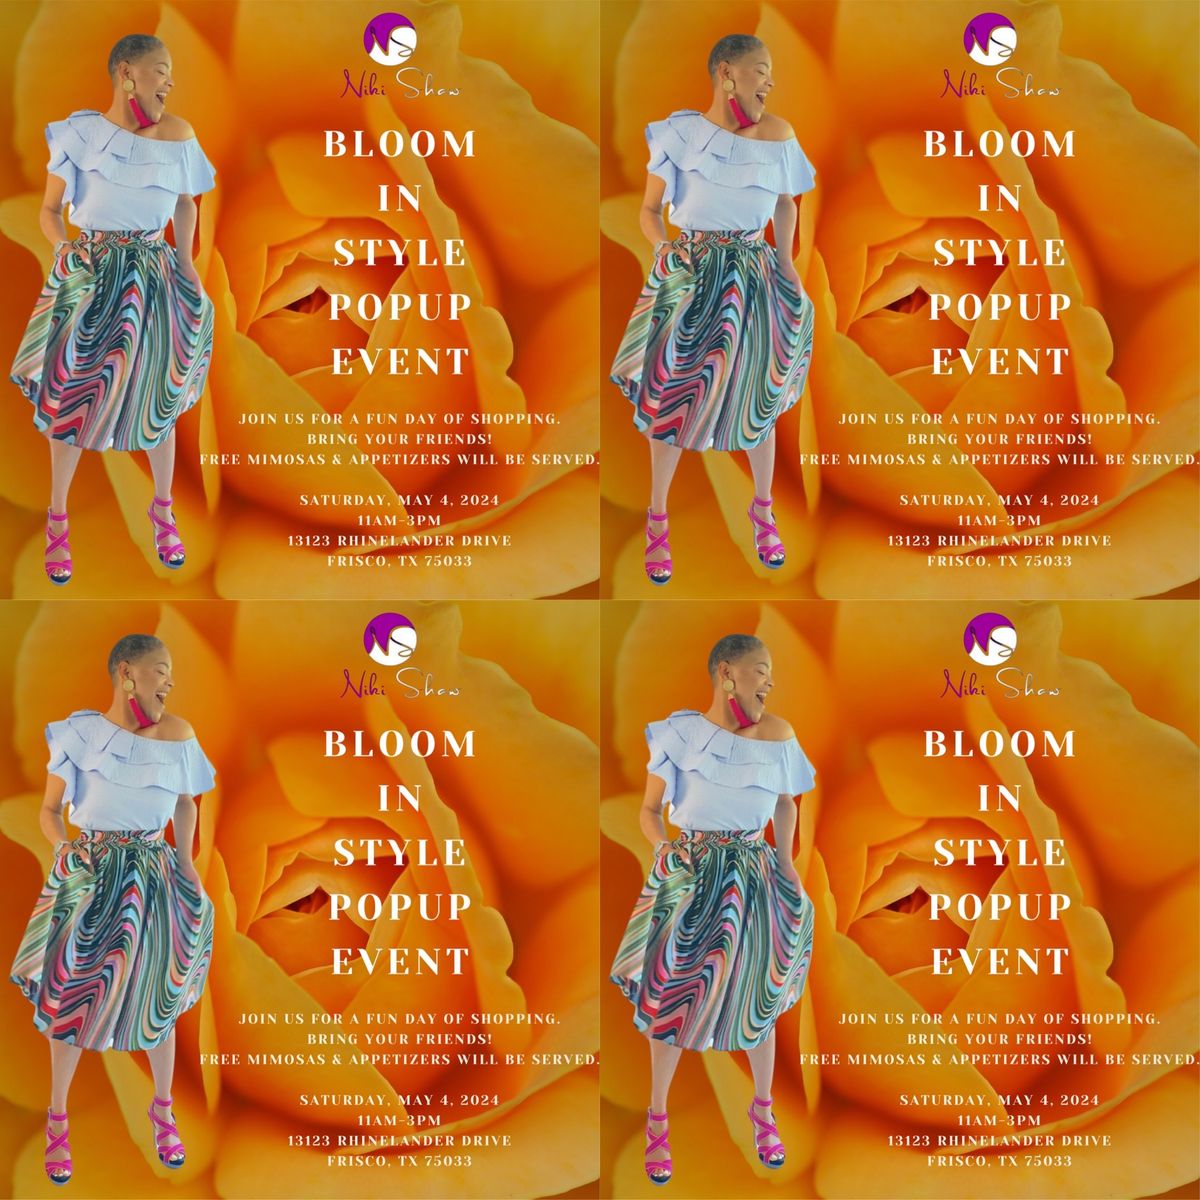 BLOOM IN STYLE